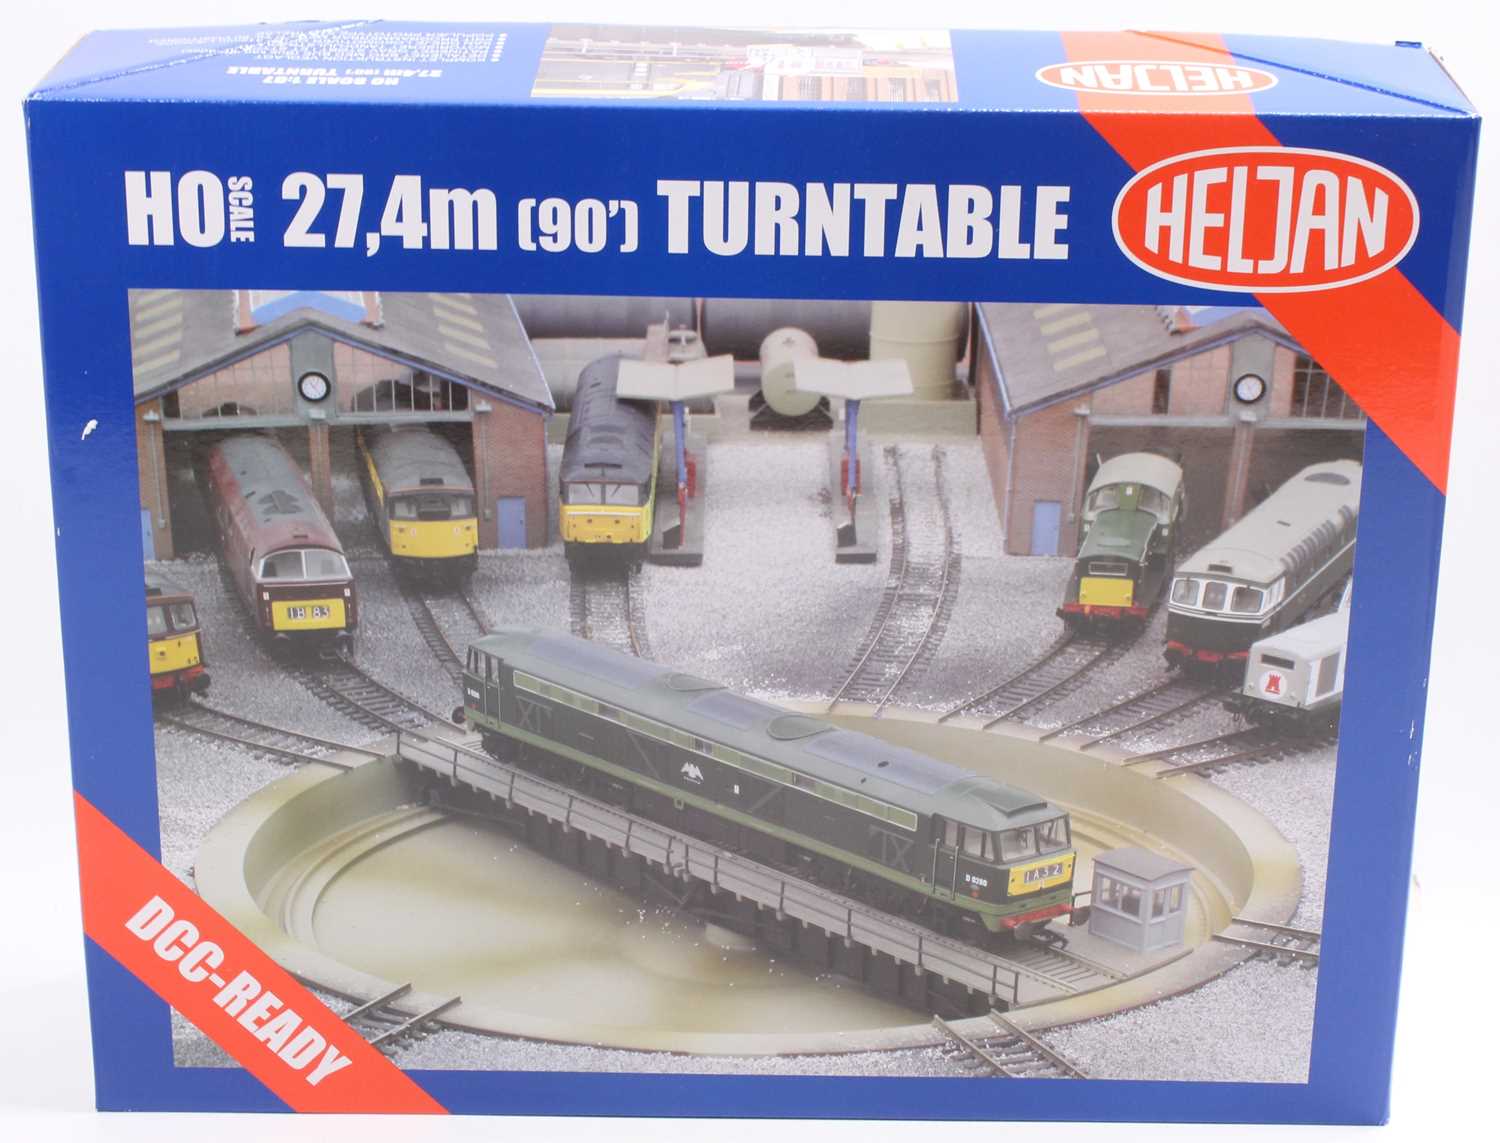 A Heljan boxed HO scale DCC ready 27.4m (90) turntable, appears as issued, and housed in the